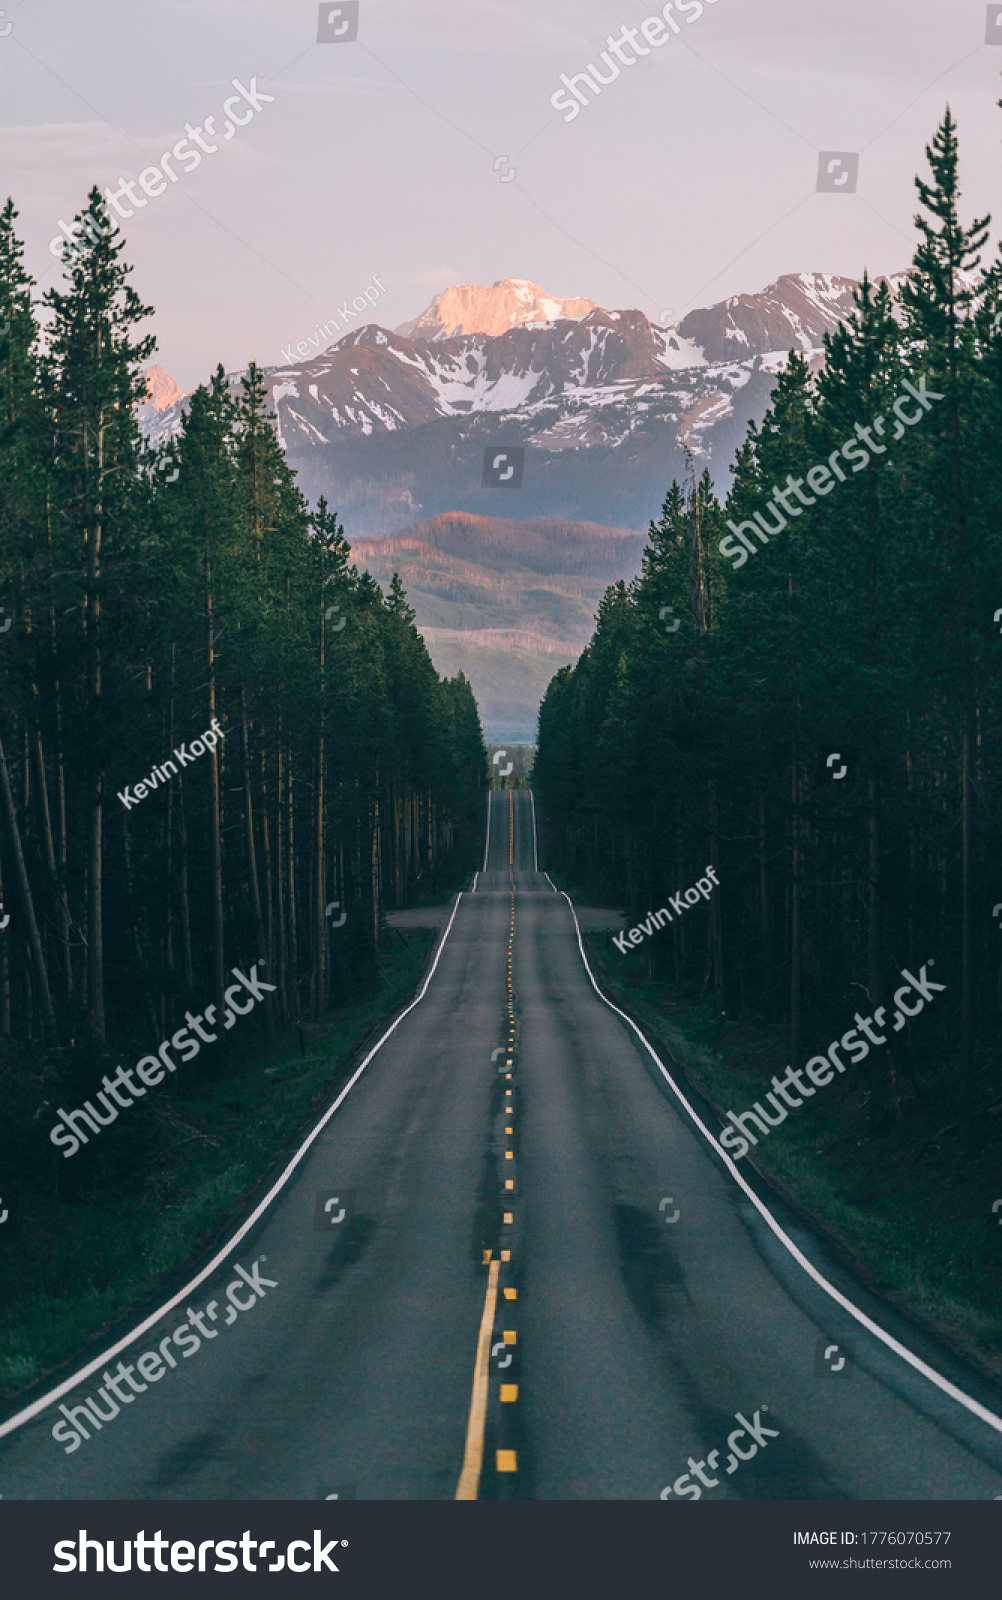 An open road leads to the Grand Teton's mountain range, rising in the distance beyond a thick pine forest. The last rays of sunlight shine on the mountain. Photo shot vertically to include more road.  #1776070577